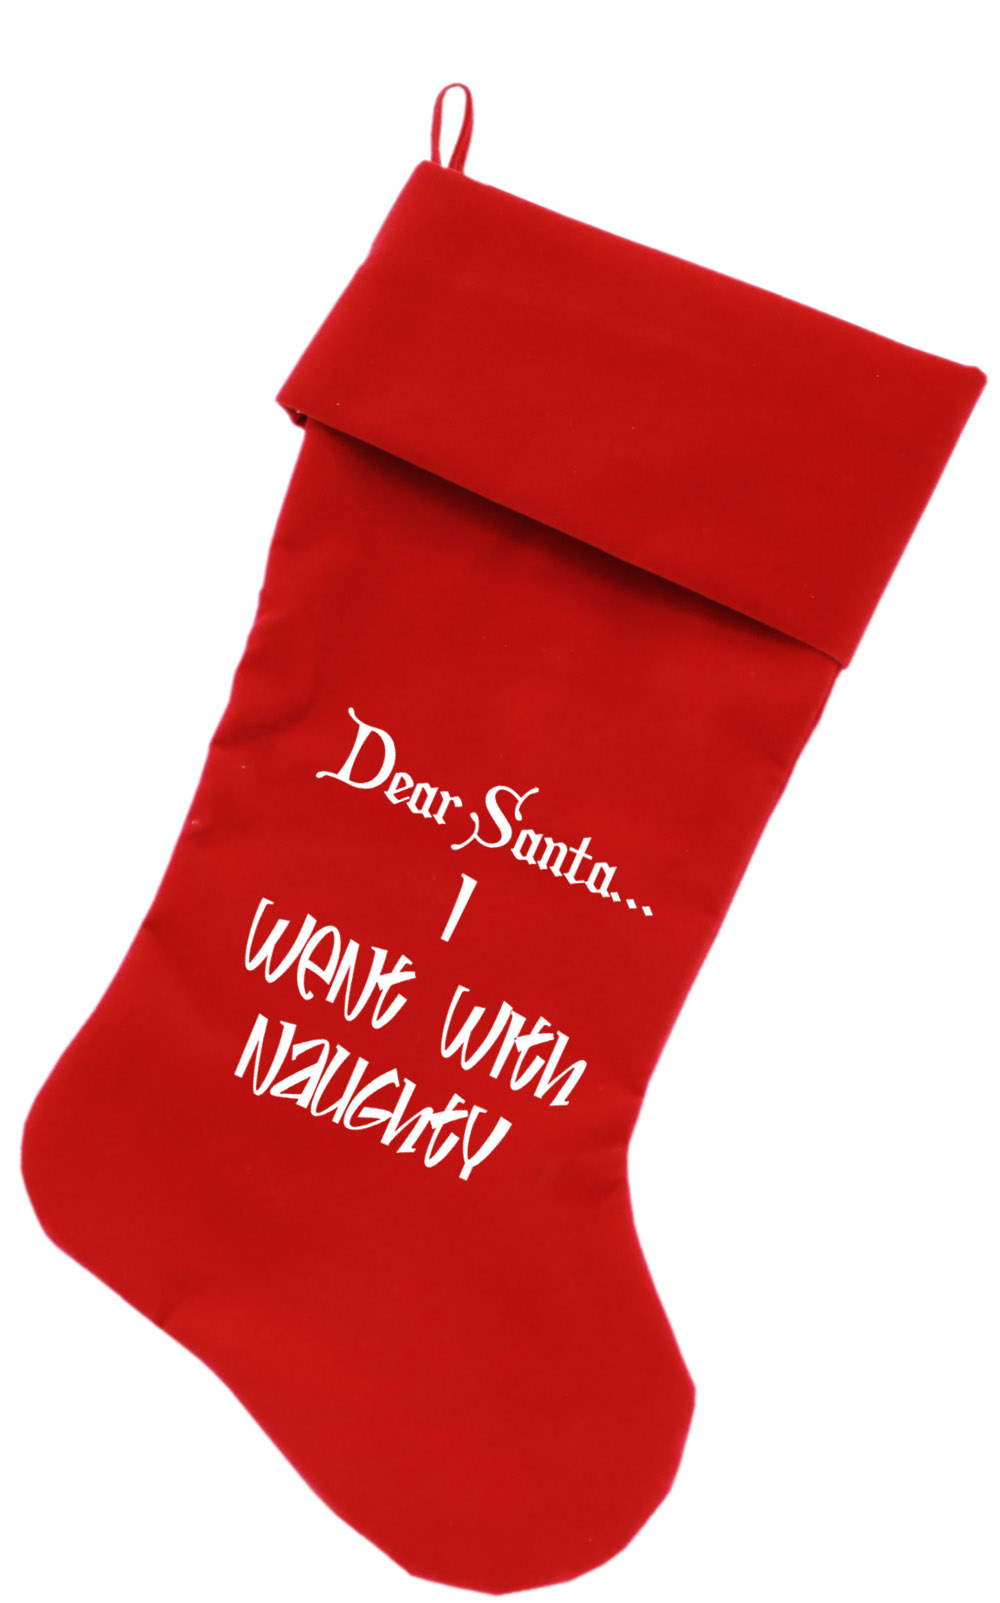 Went with Naughty Screen Print 18 inch Velvet Christmas Stocking Red